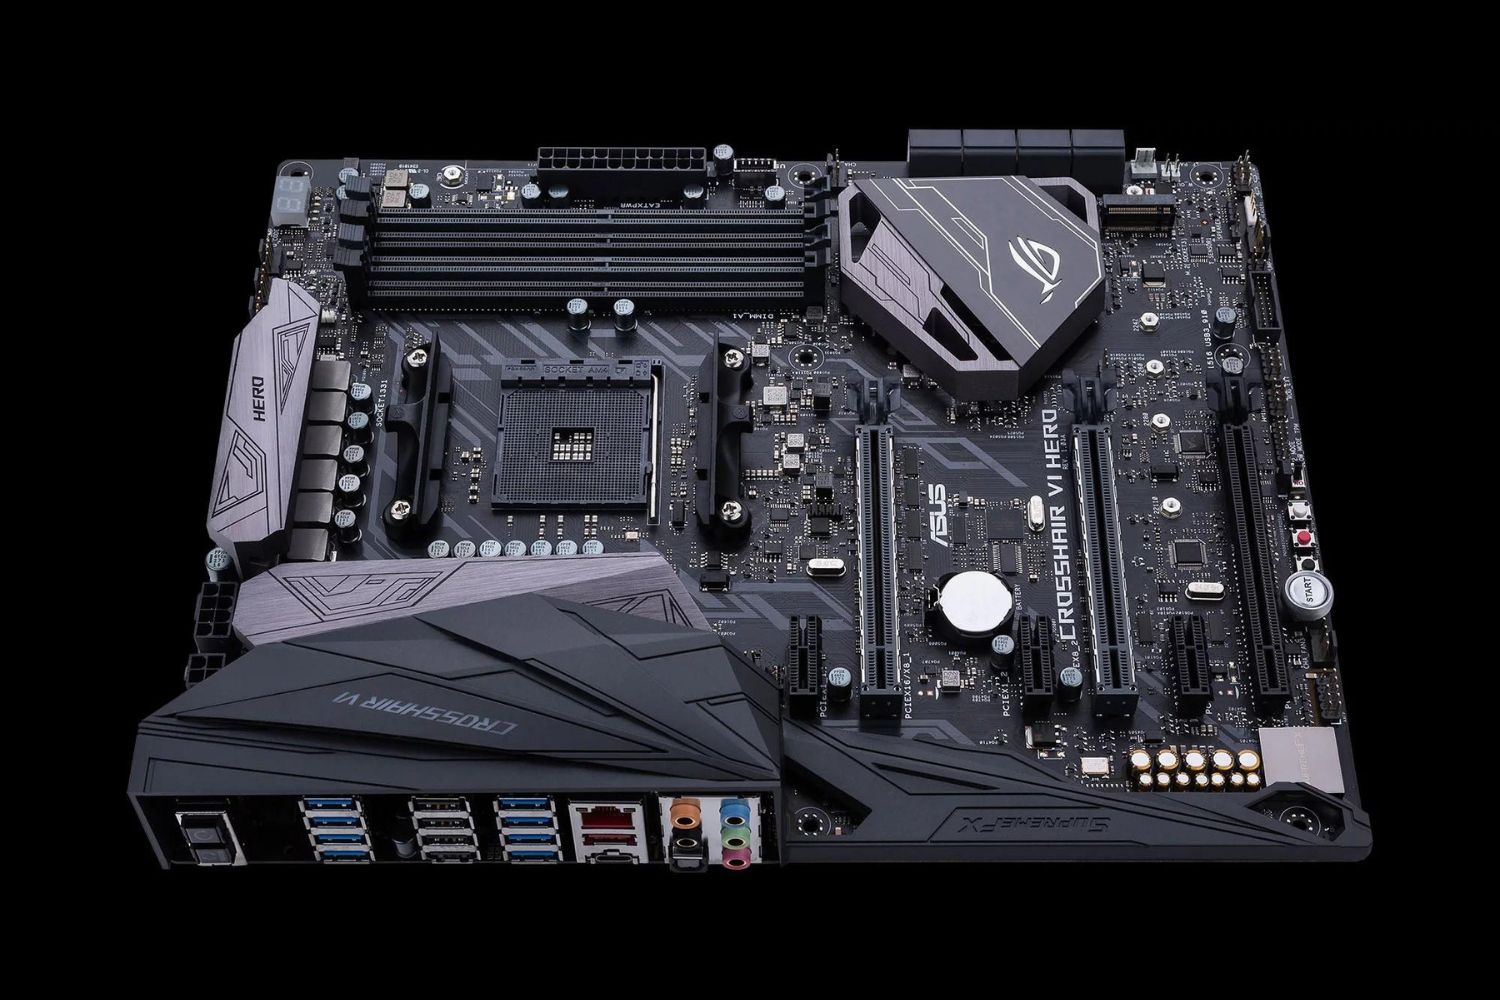 What CPU Cooler Can Go On Asus – Crosshair VI Hero ATX AM4 Motherboard